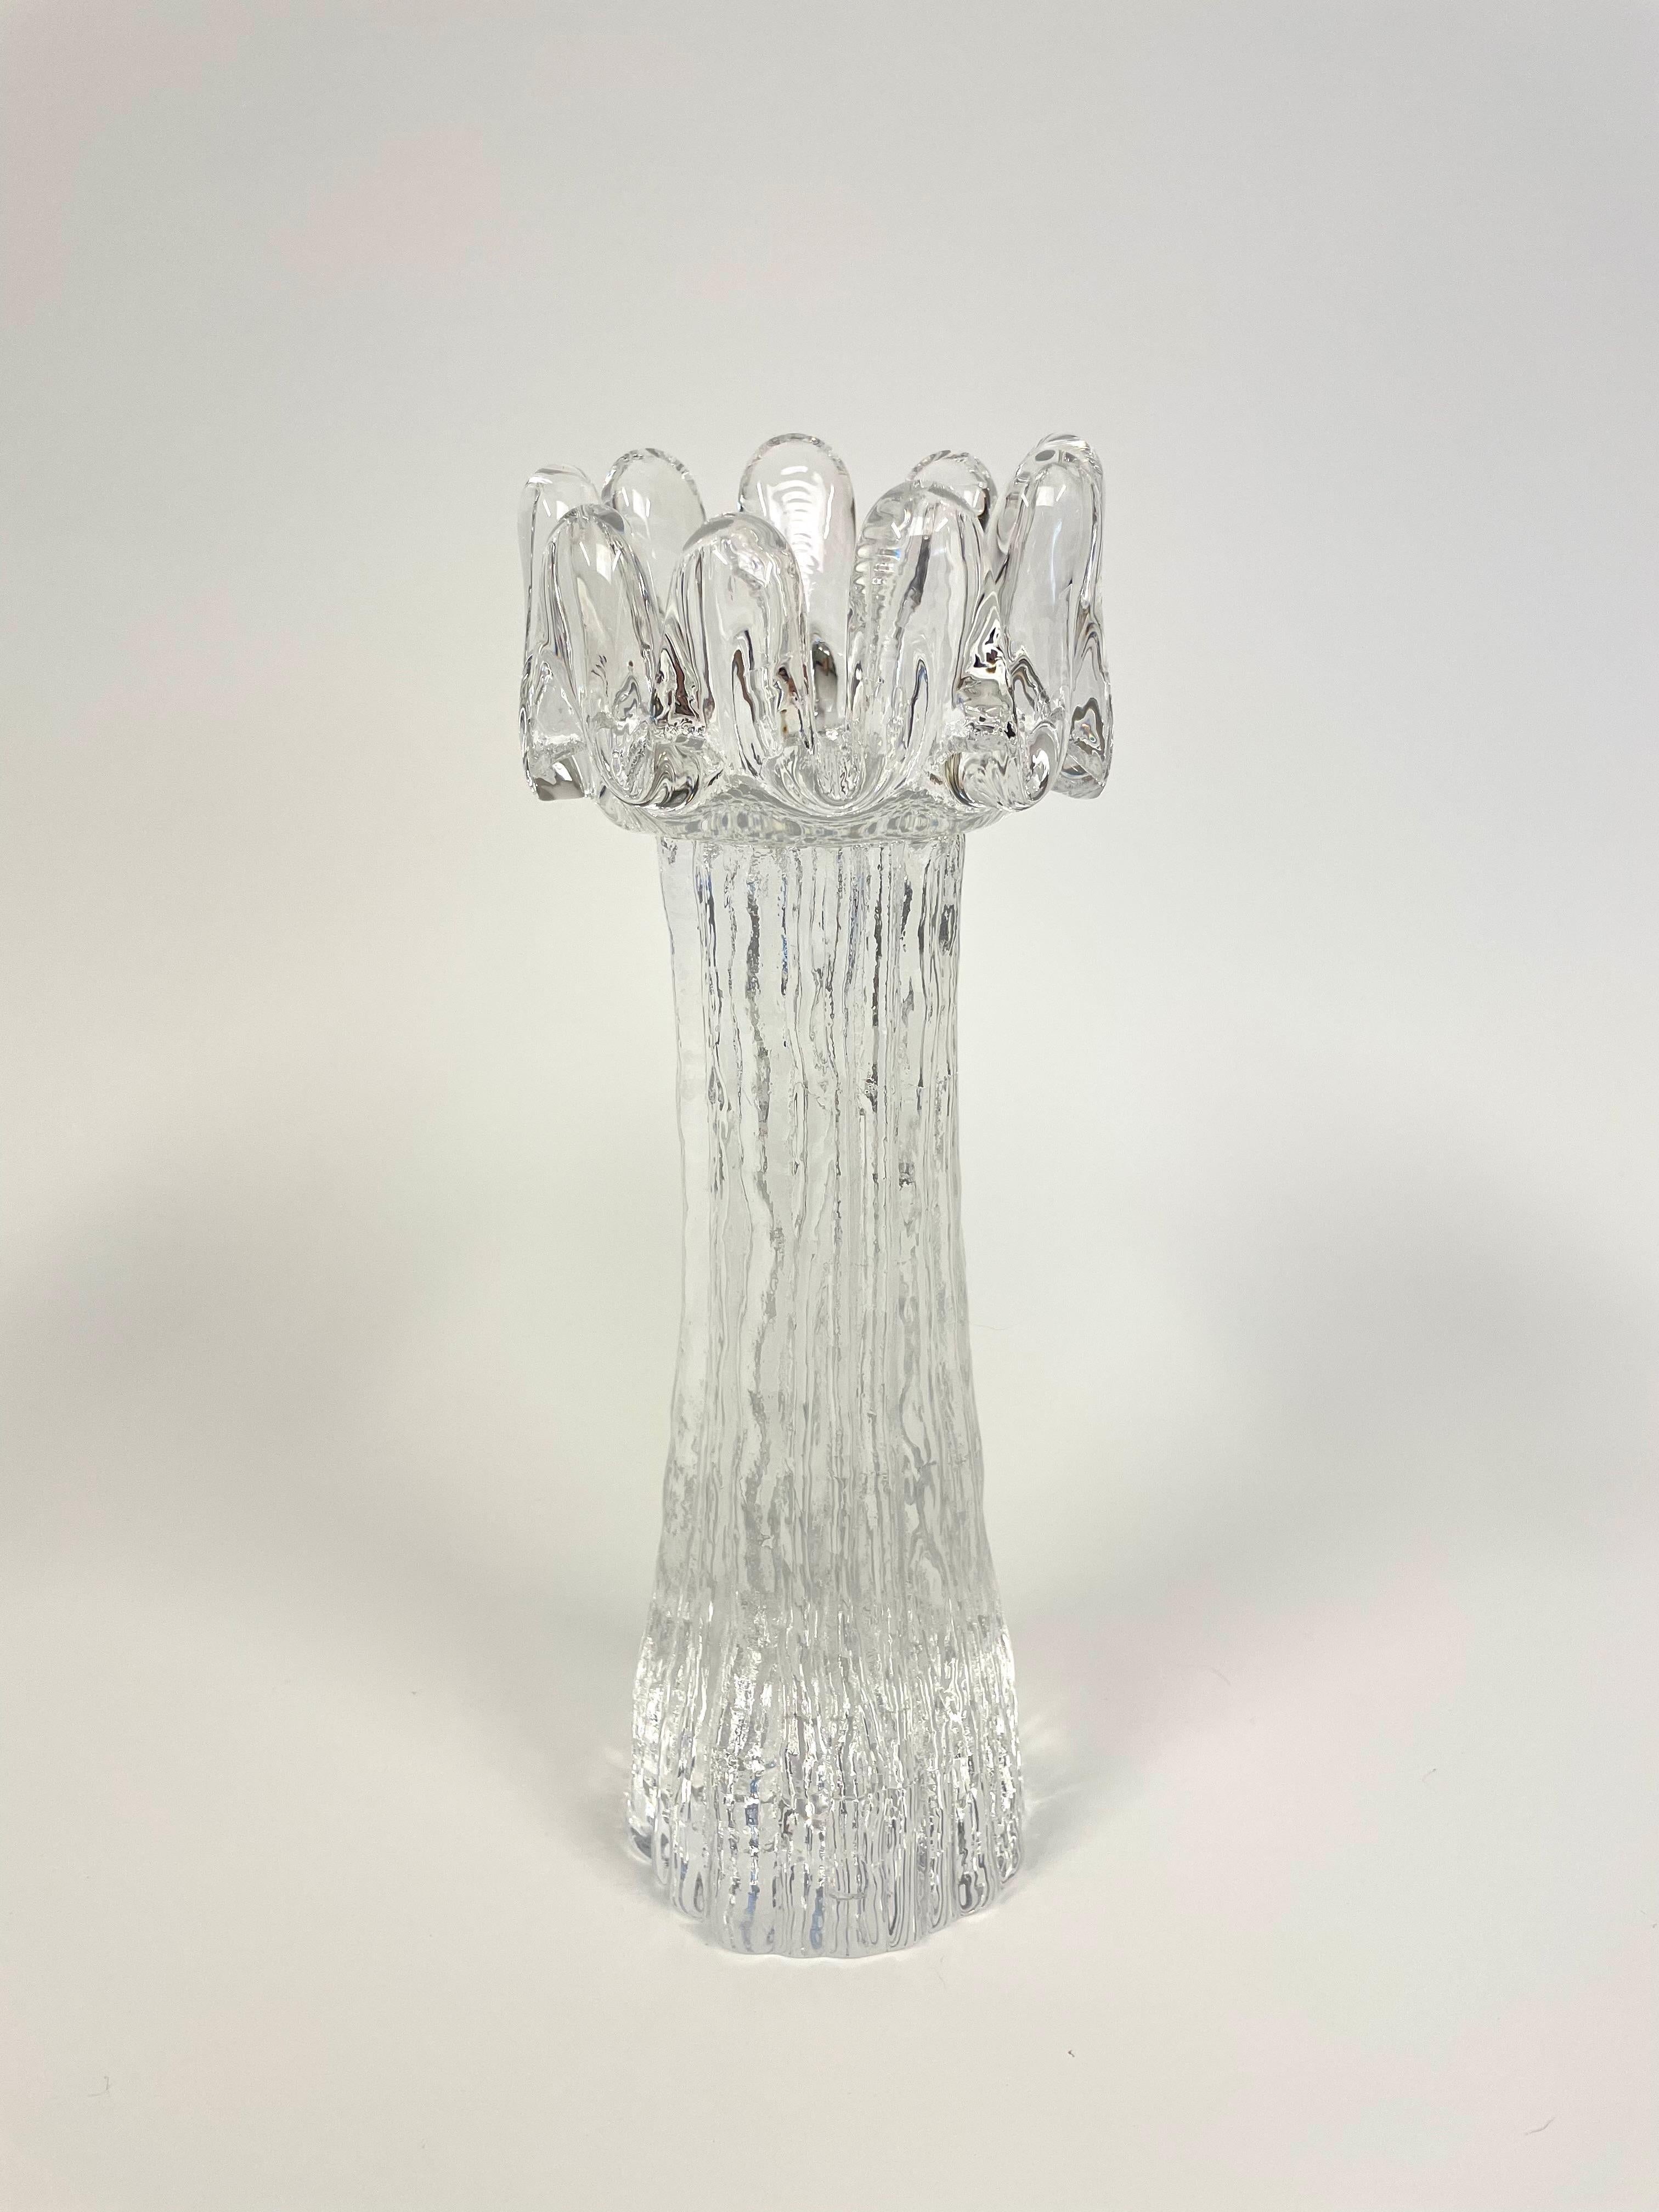 This is a Swedish set of 6 pieces Sunflower candlesticks set by the glass artist Göran Wärff for Kosta Boda Glasbruk. 

It comes with 6 crystal candlesticks in different sizes and shapes that brings to mind the stout stem of a sunflower, crowned by